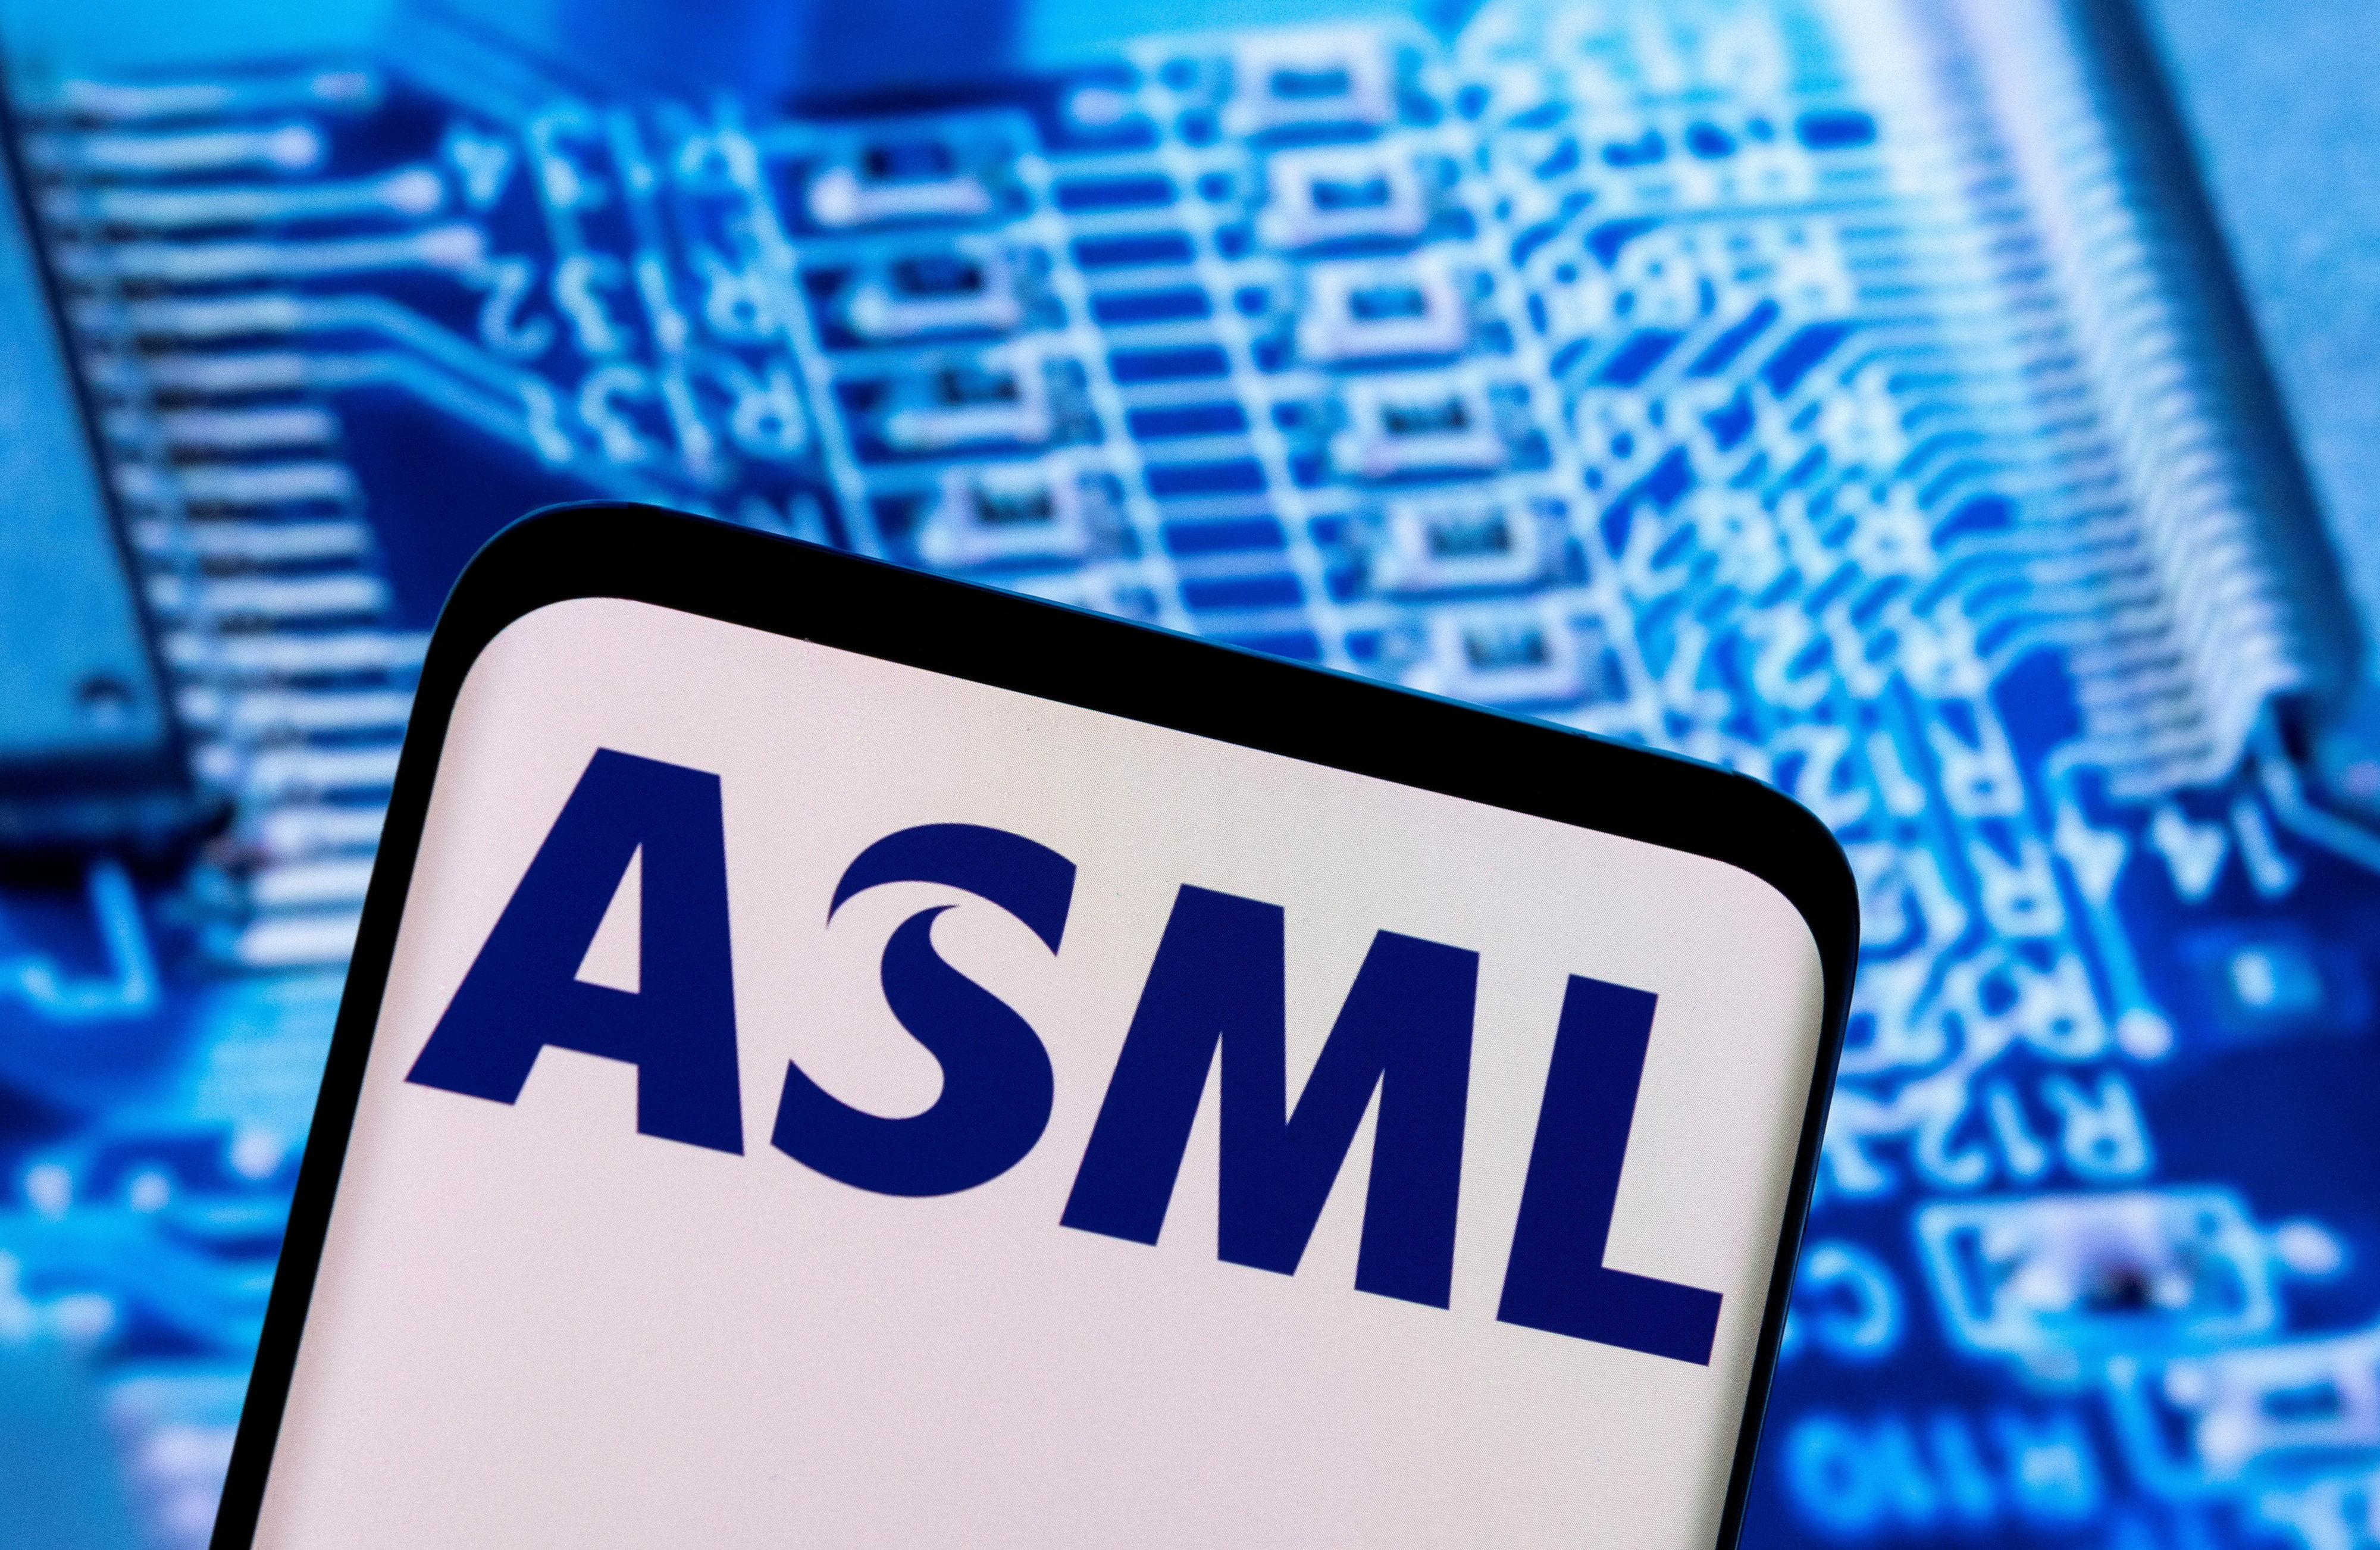 The ASML logo is seen in this illustration photo taken on February 28, 2022. Photo: Reuters